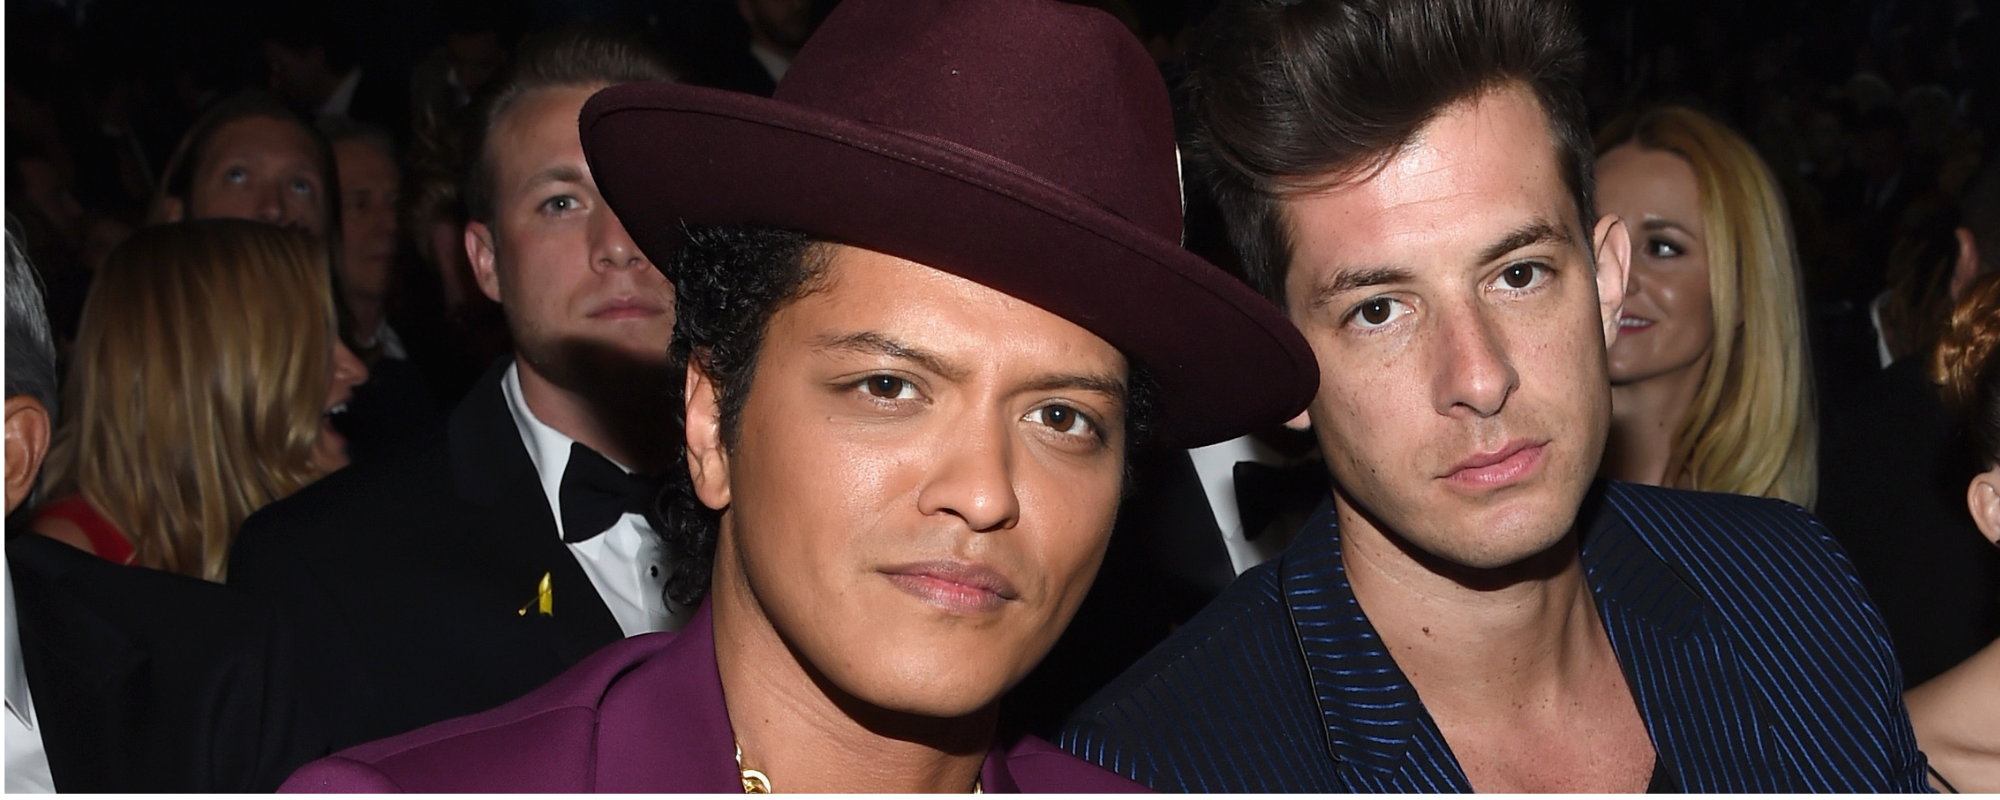 Mark Ronson and Bruno Mars’ “Uptown Funk” Video Director Shares the Story Behind the Video